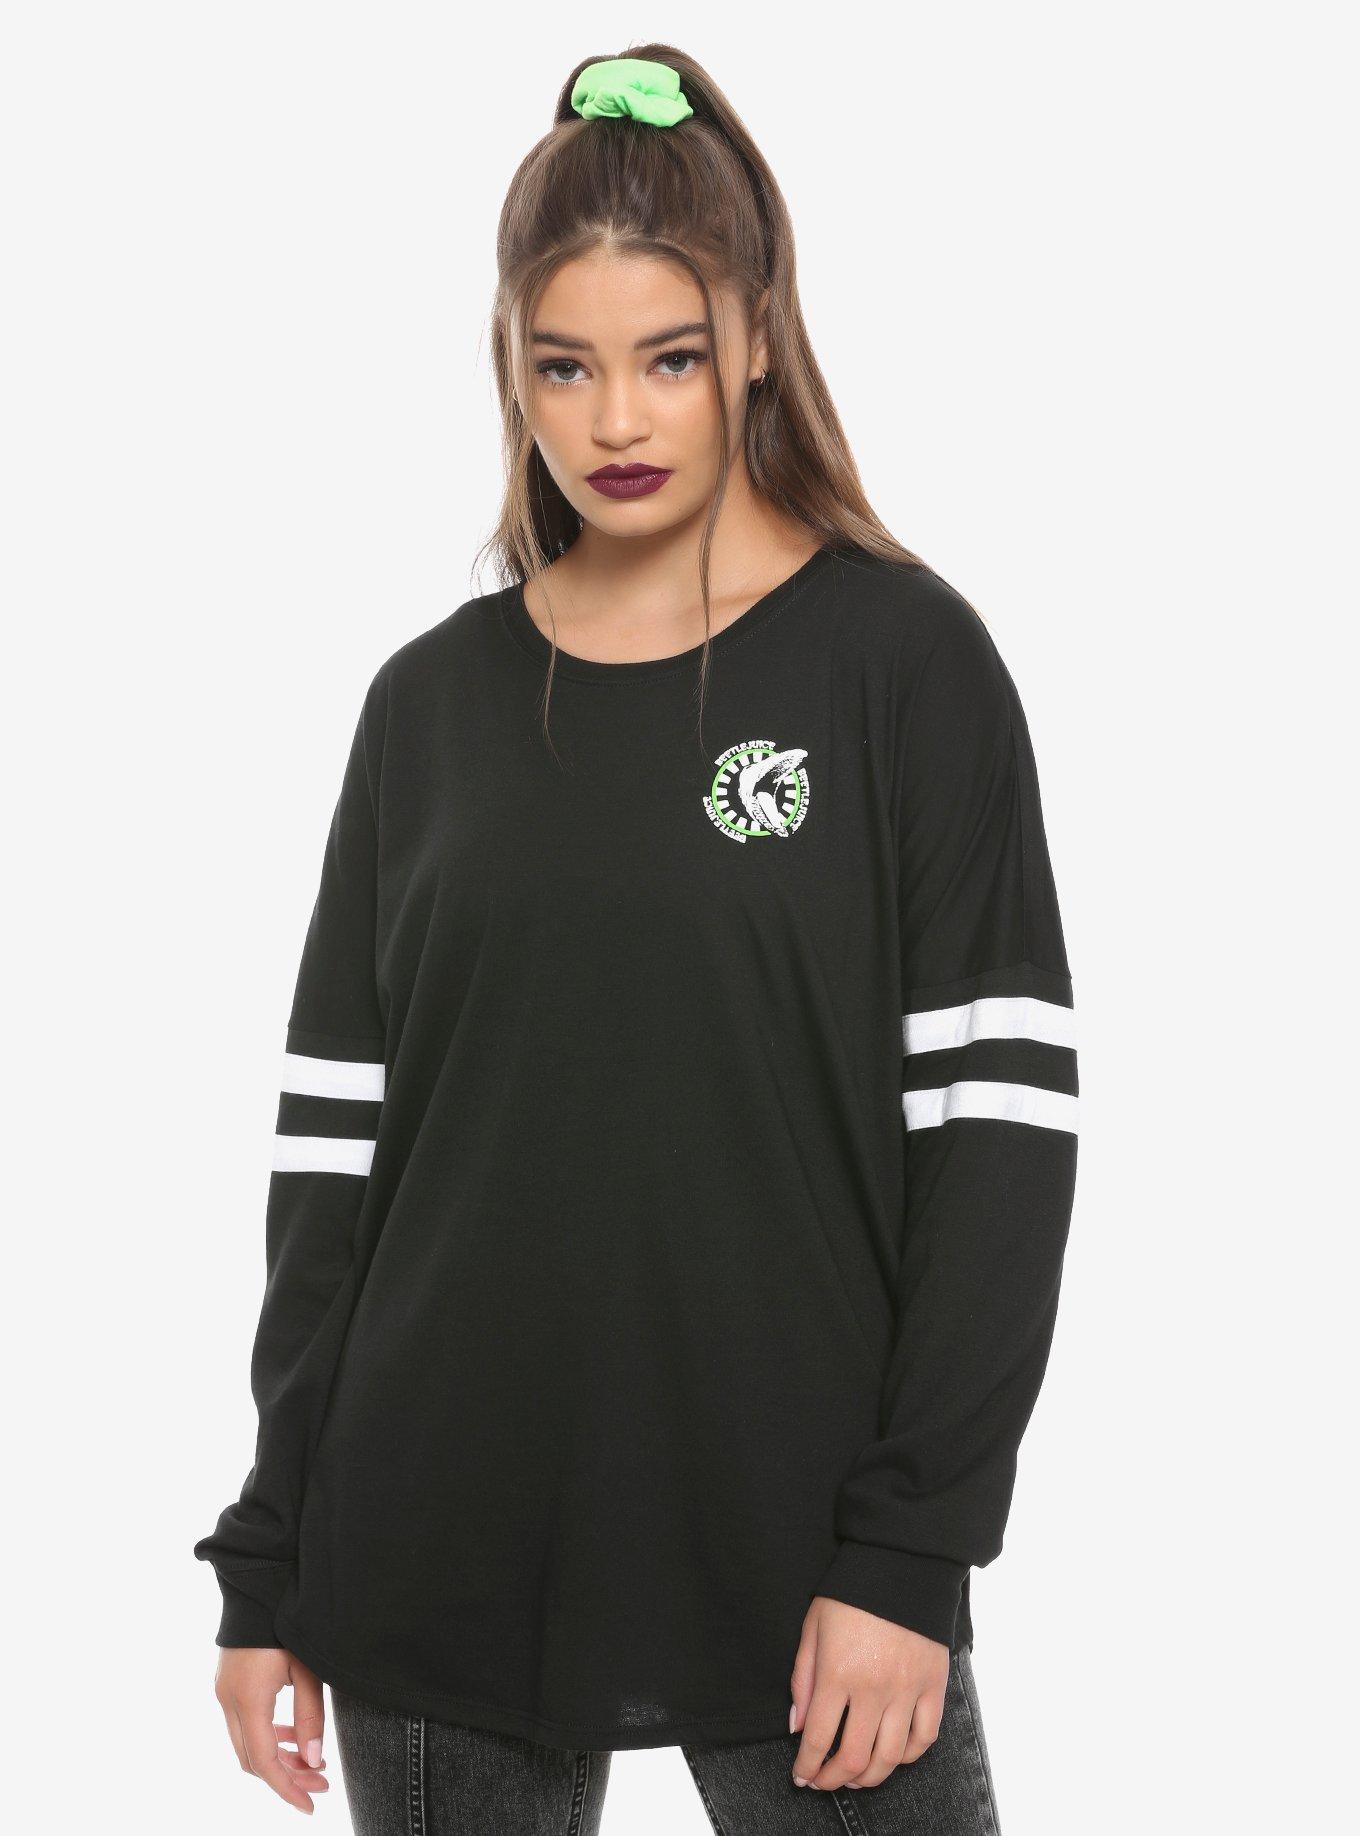 Beetlejuice It's Showtime Girls Athletic Jersey, GREEN, hi-res